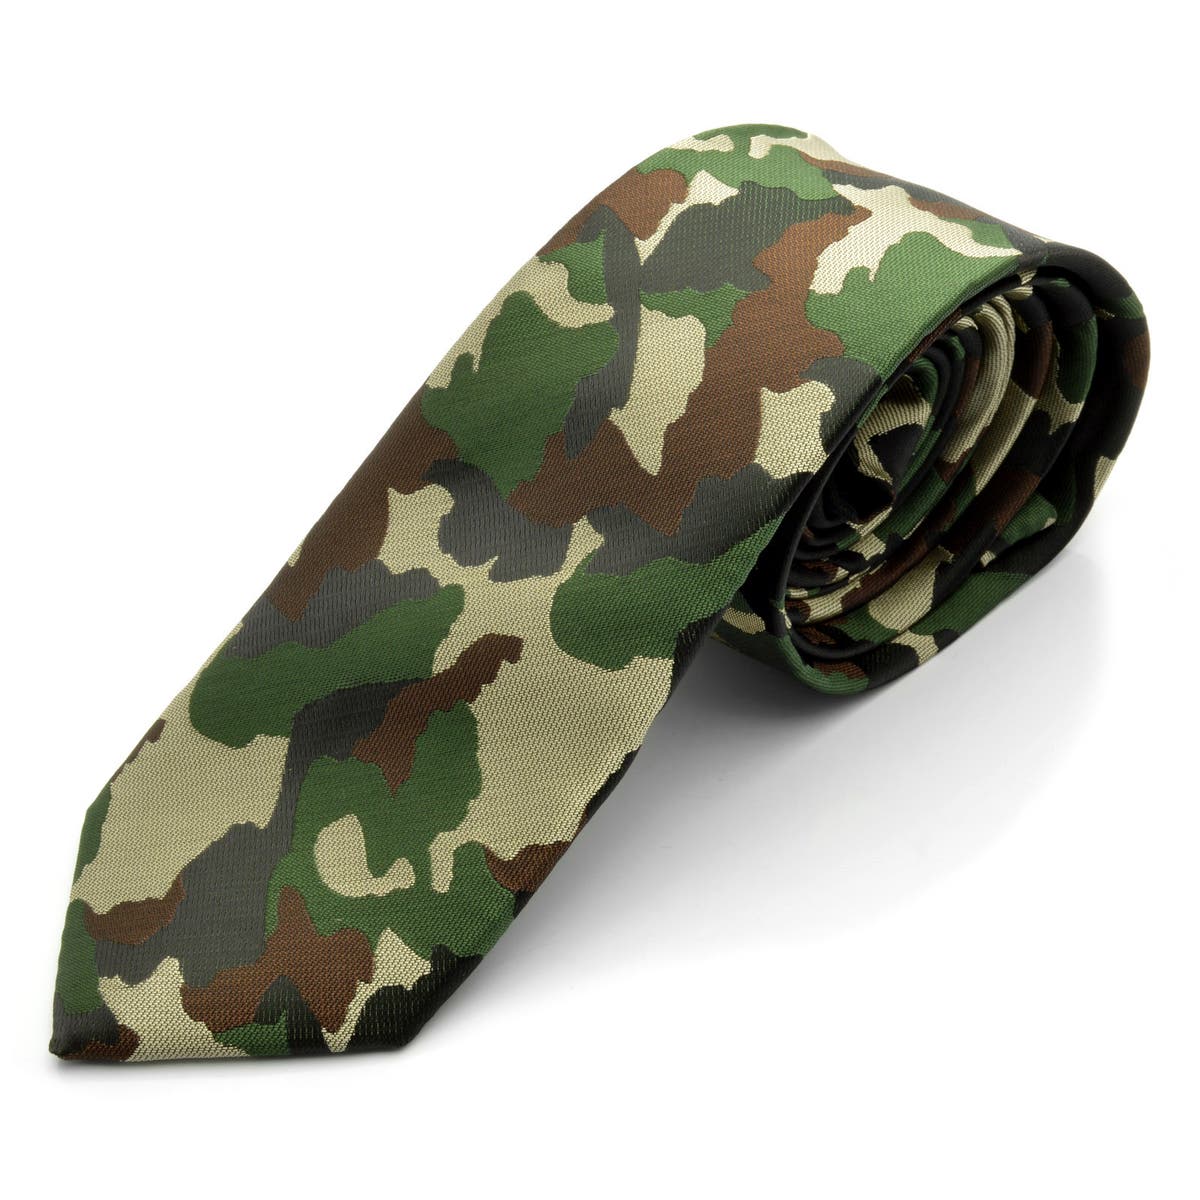 Blue & Brown Camouflage Polyester Tie, In stock!